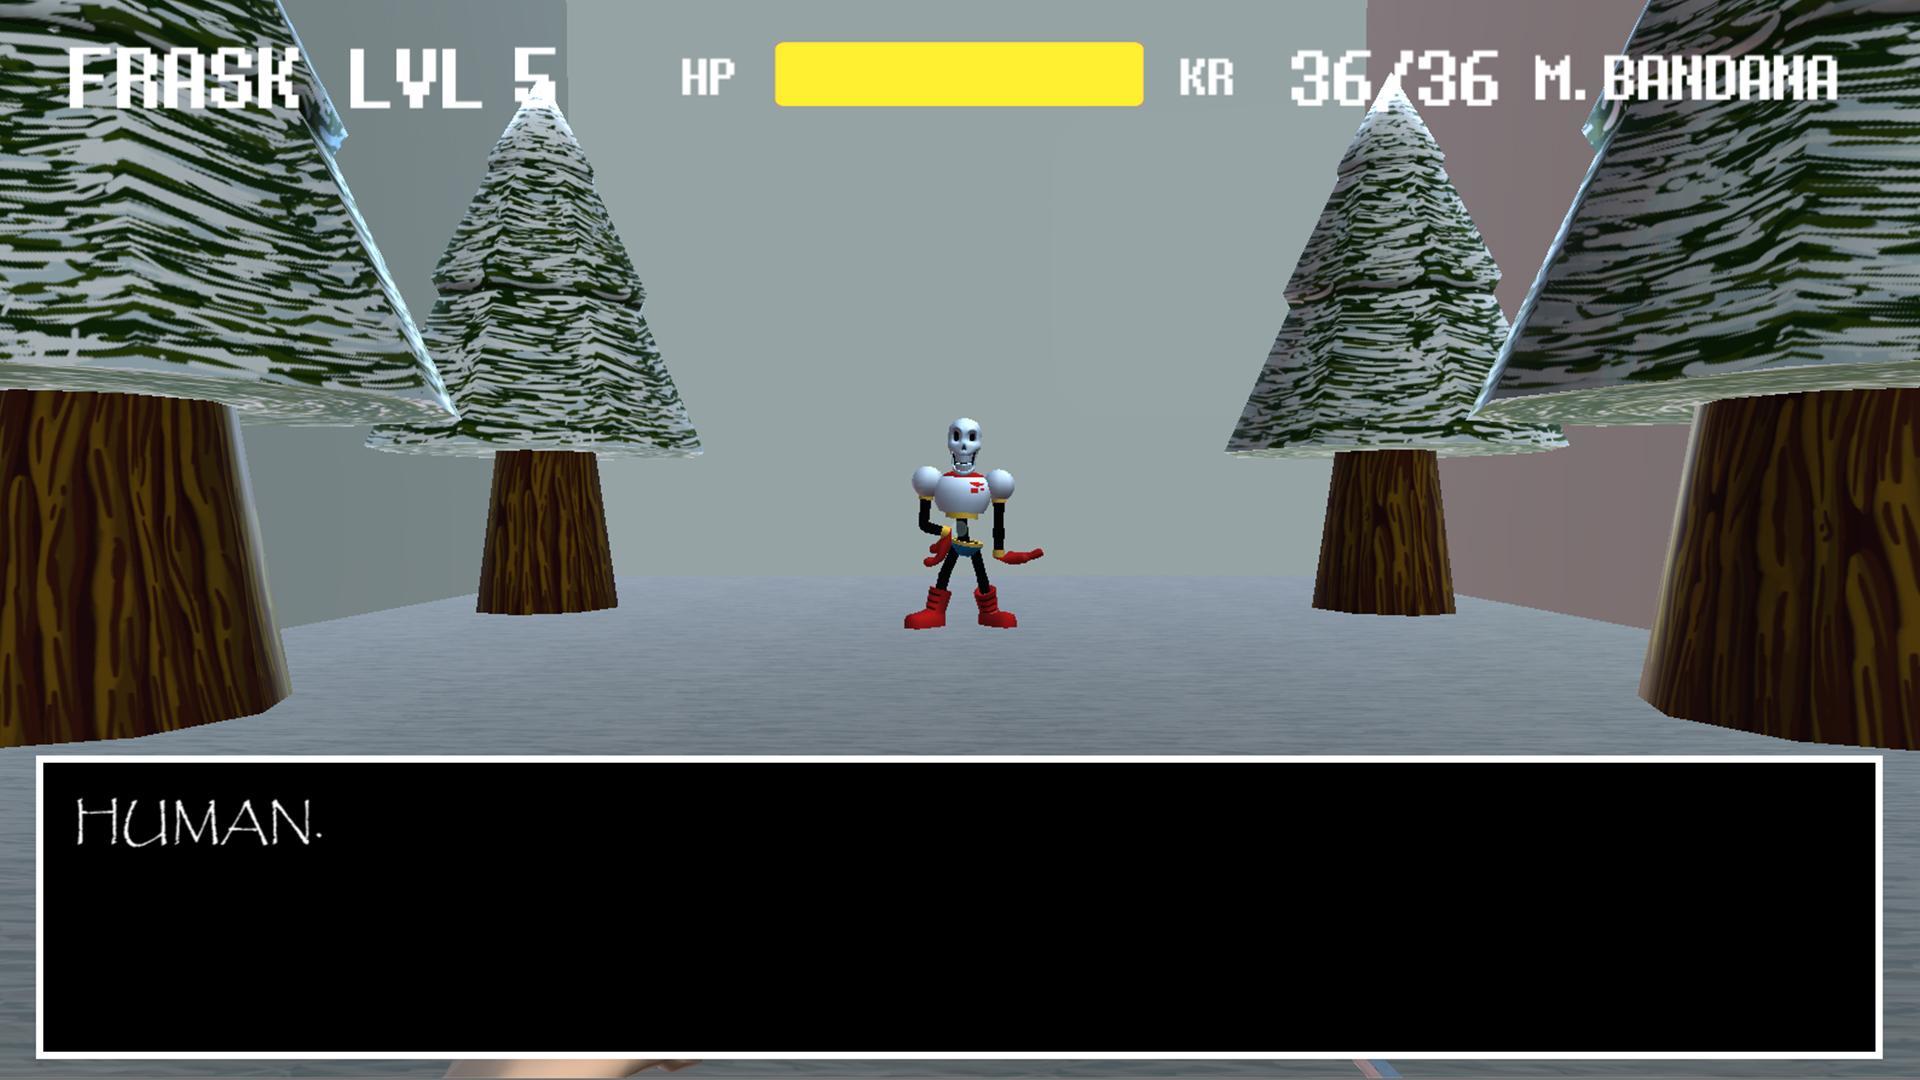 Screenshot of 3DTale - Papyrus